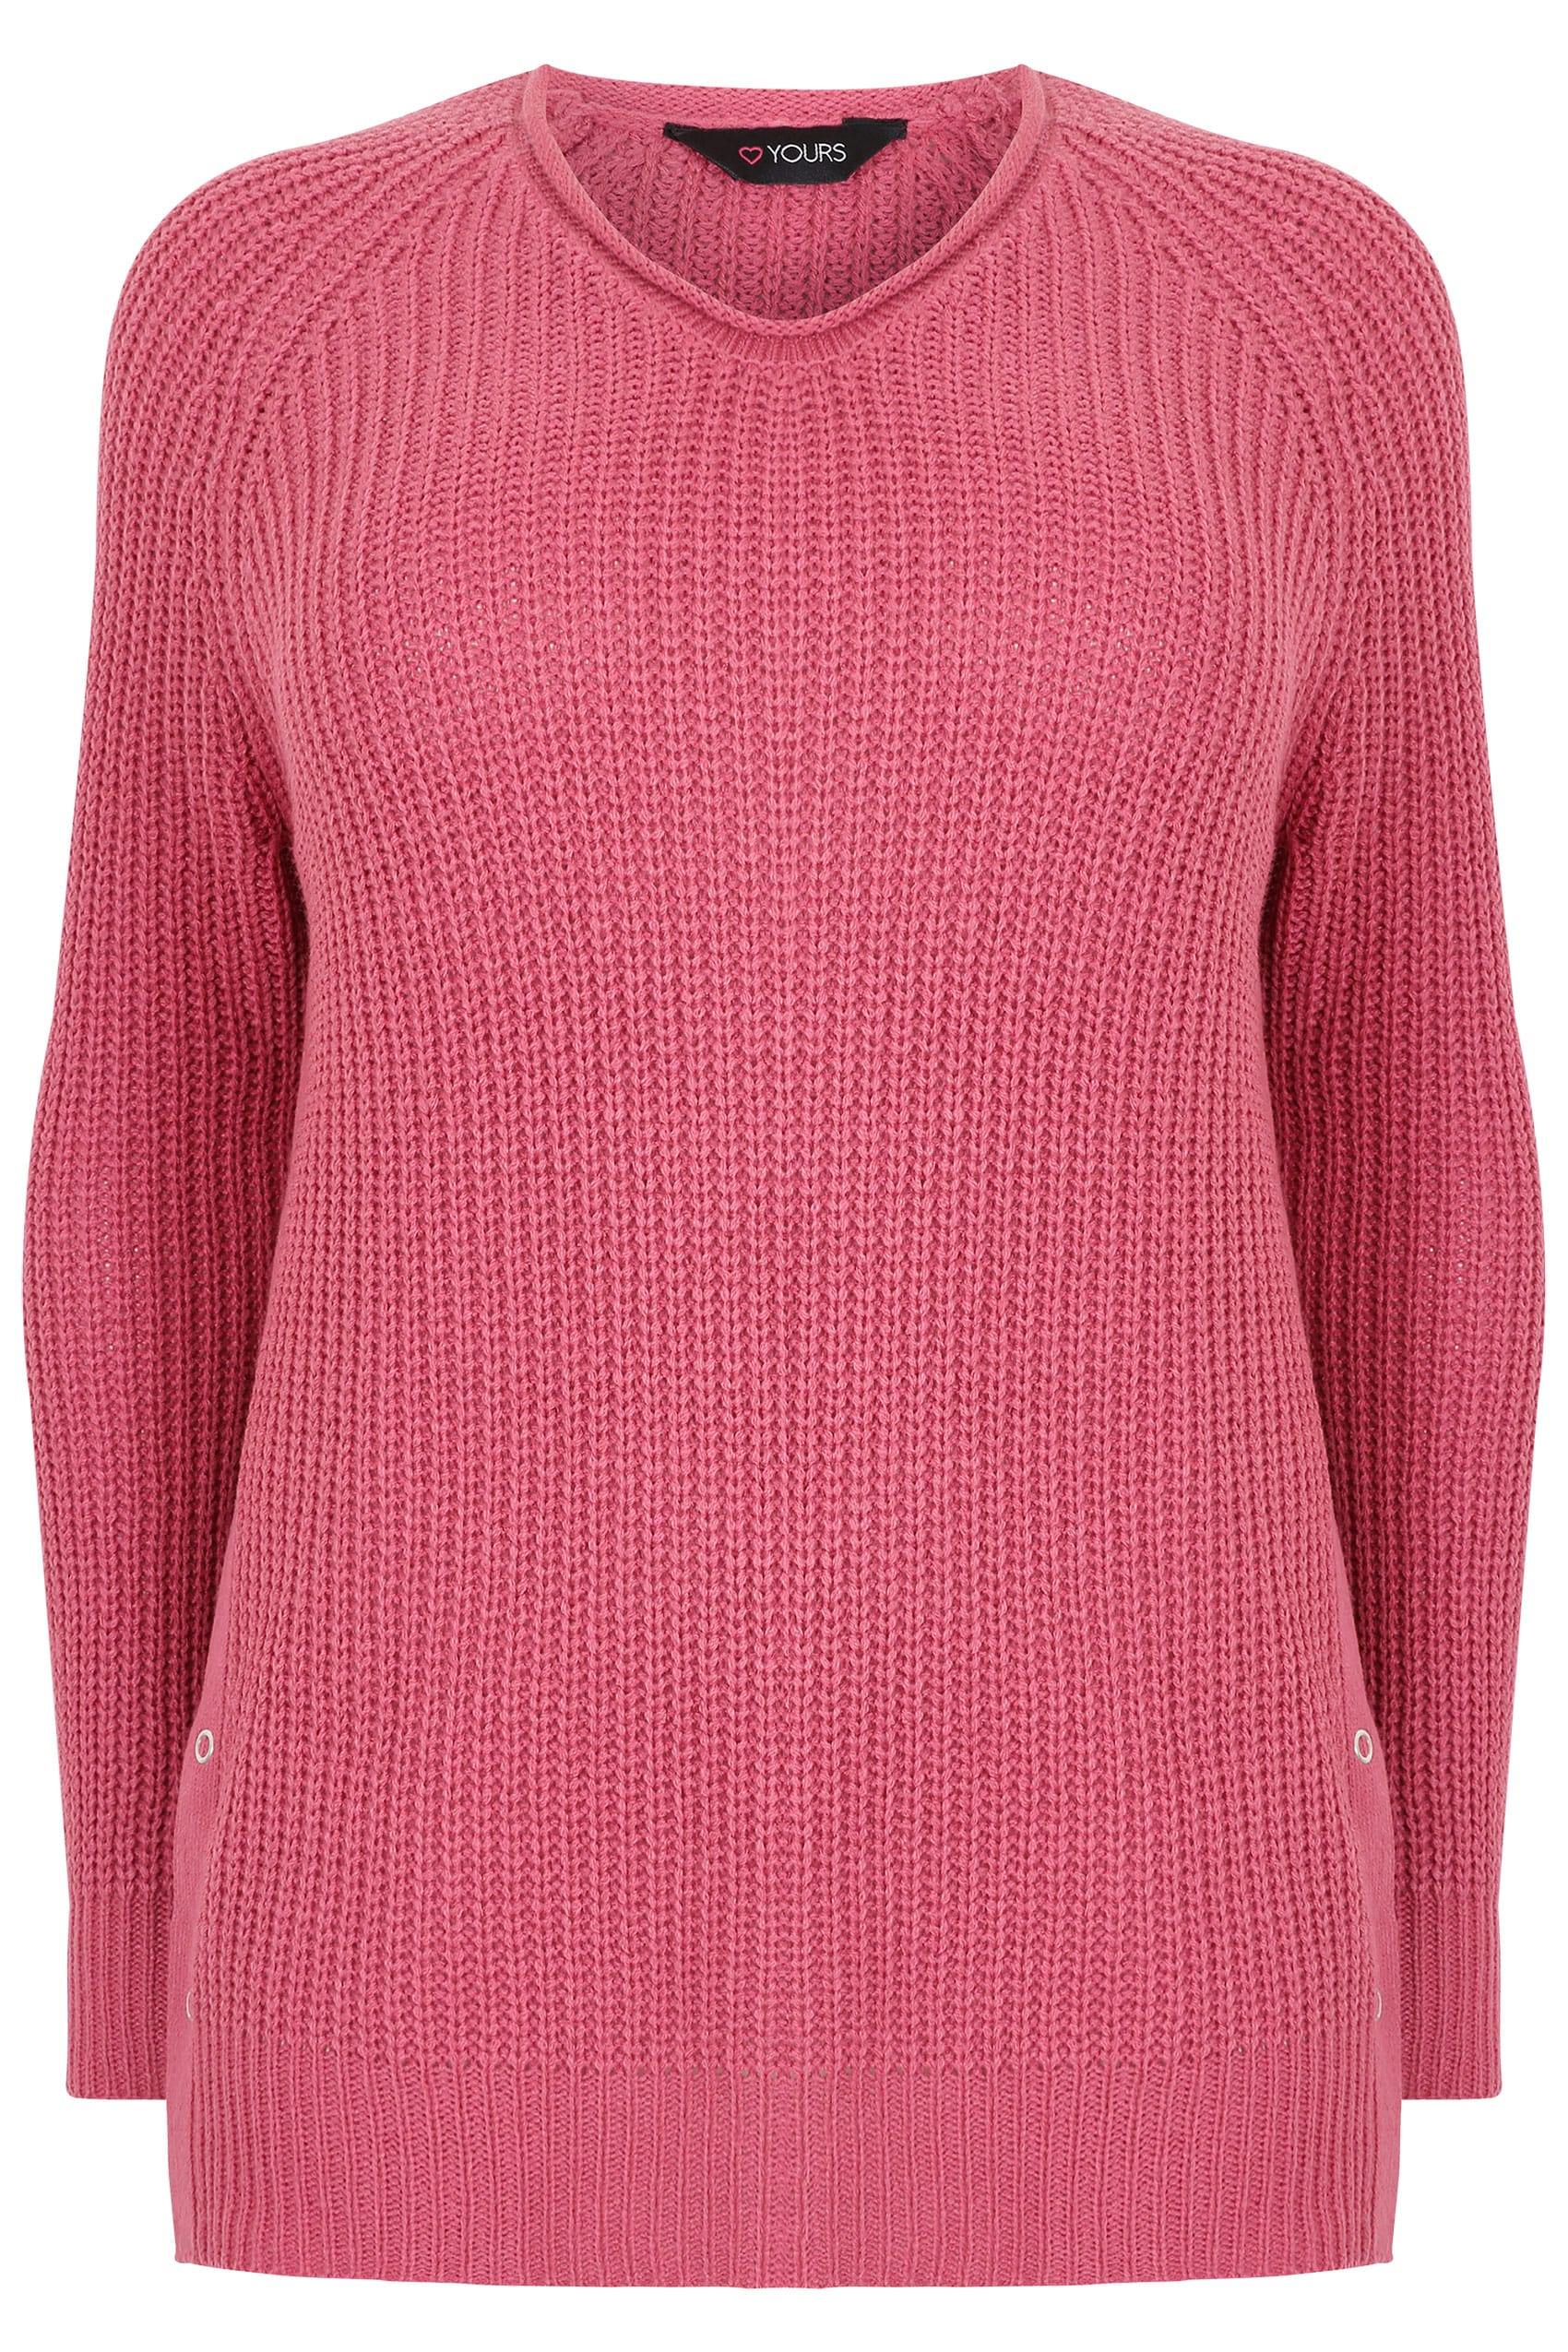 Dusty Pink Chunky Knit V-Neck Jumper With Popper Sides, Plus size 16 to 36